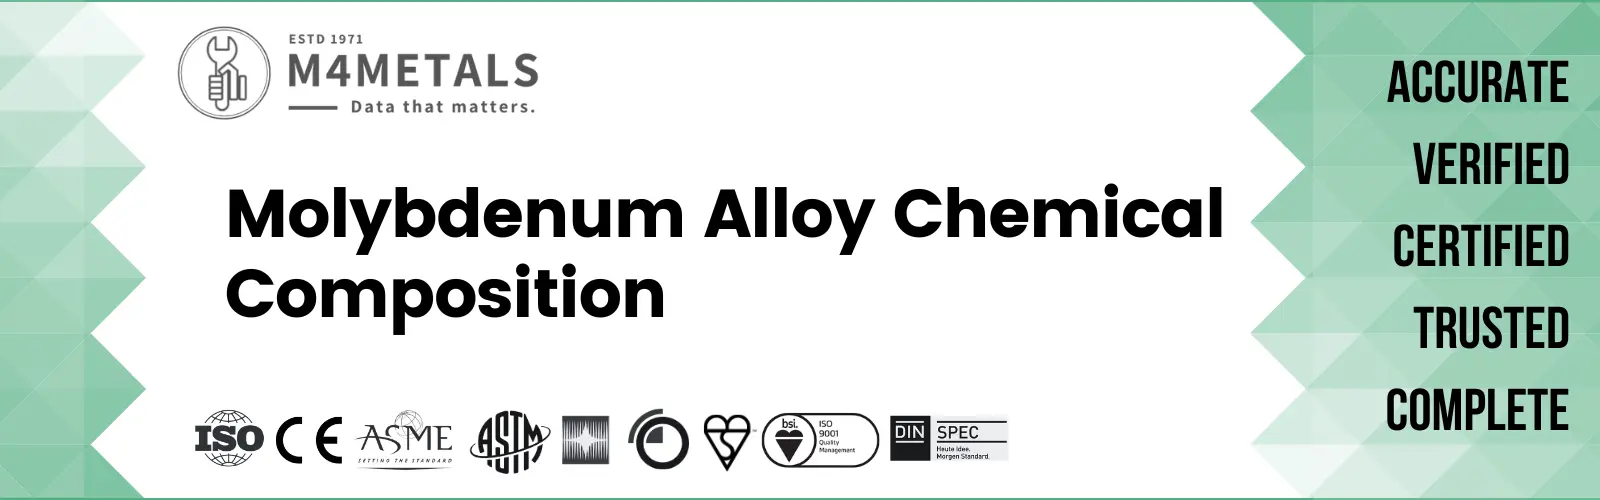 Molybdenum Alloy Chemical Composition